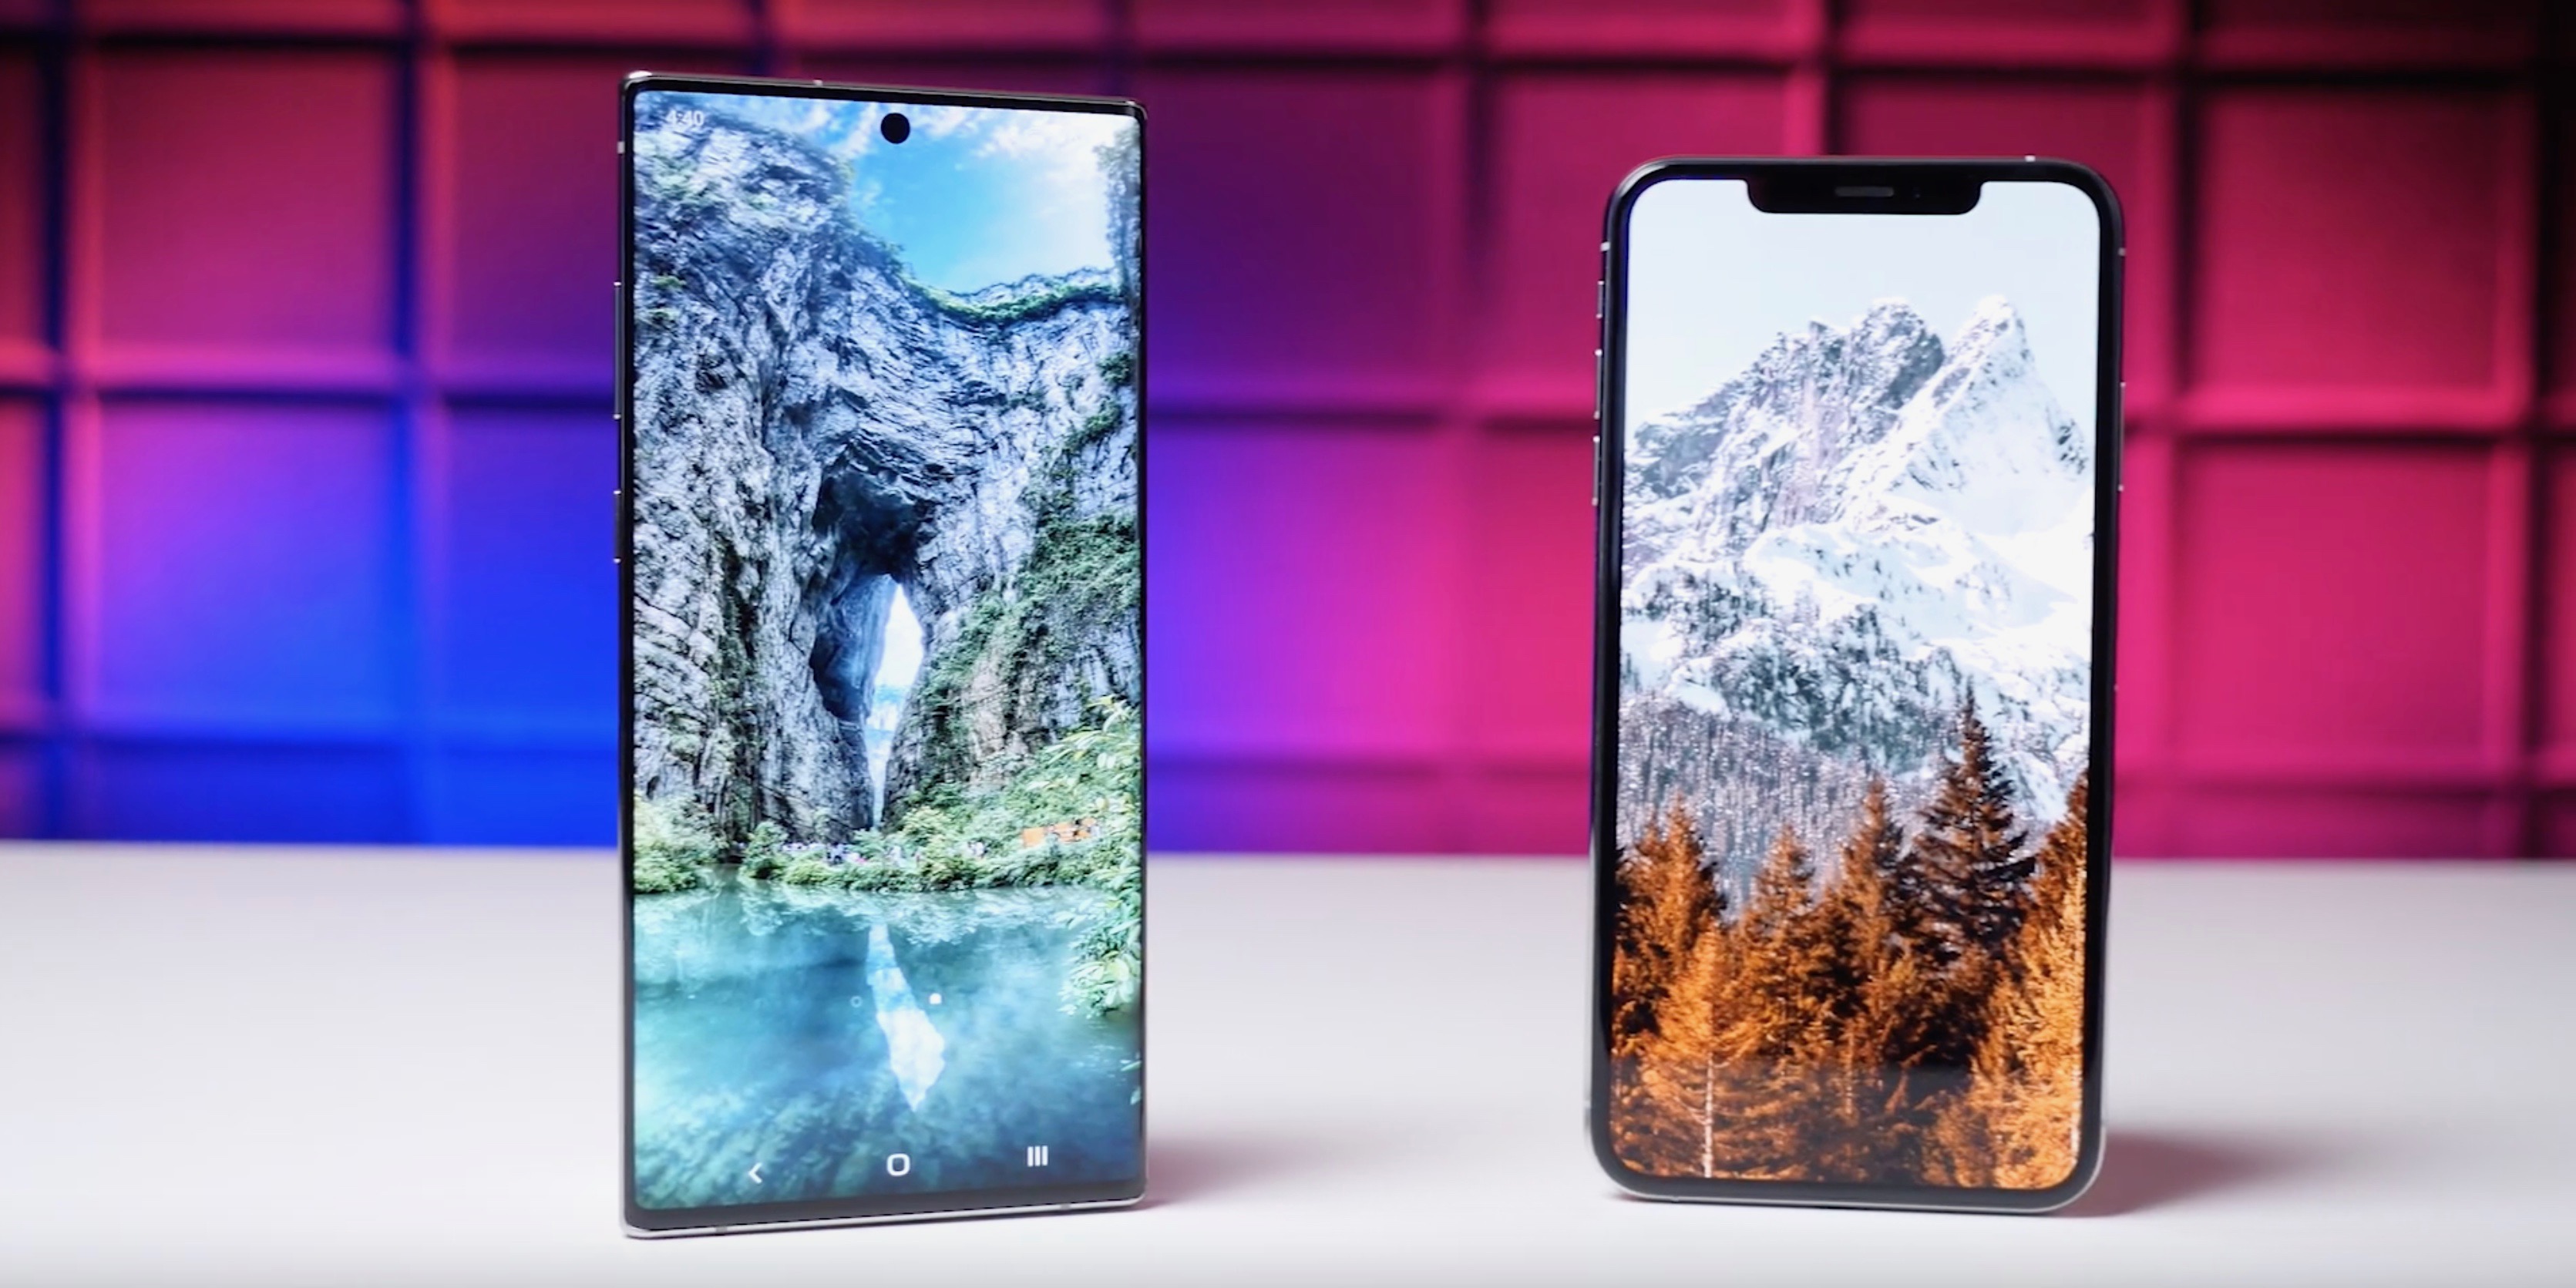 Iphone Xs Max Ranks Behind Samsung Galaxy Note 10 Ahead Of Iphone 11 Debut 9to5mac